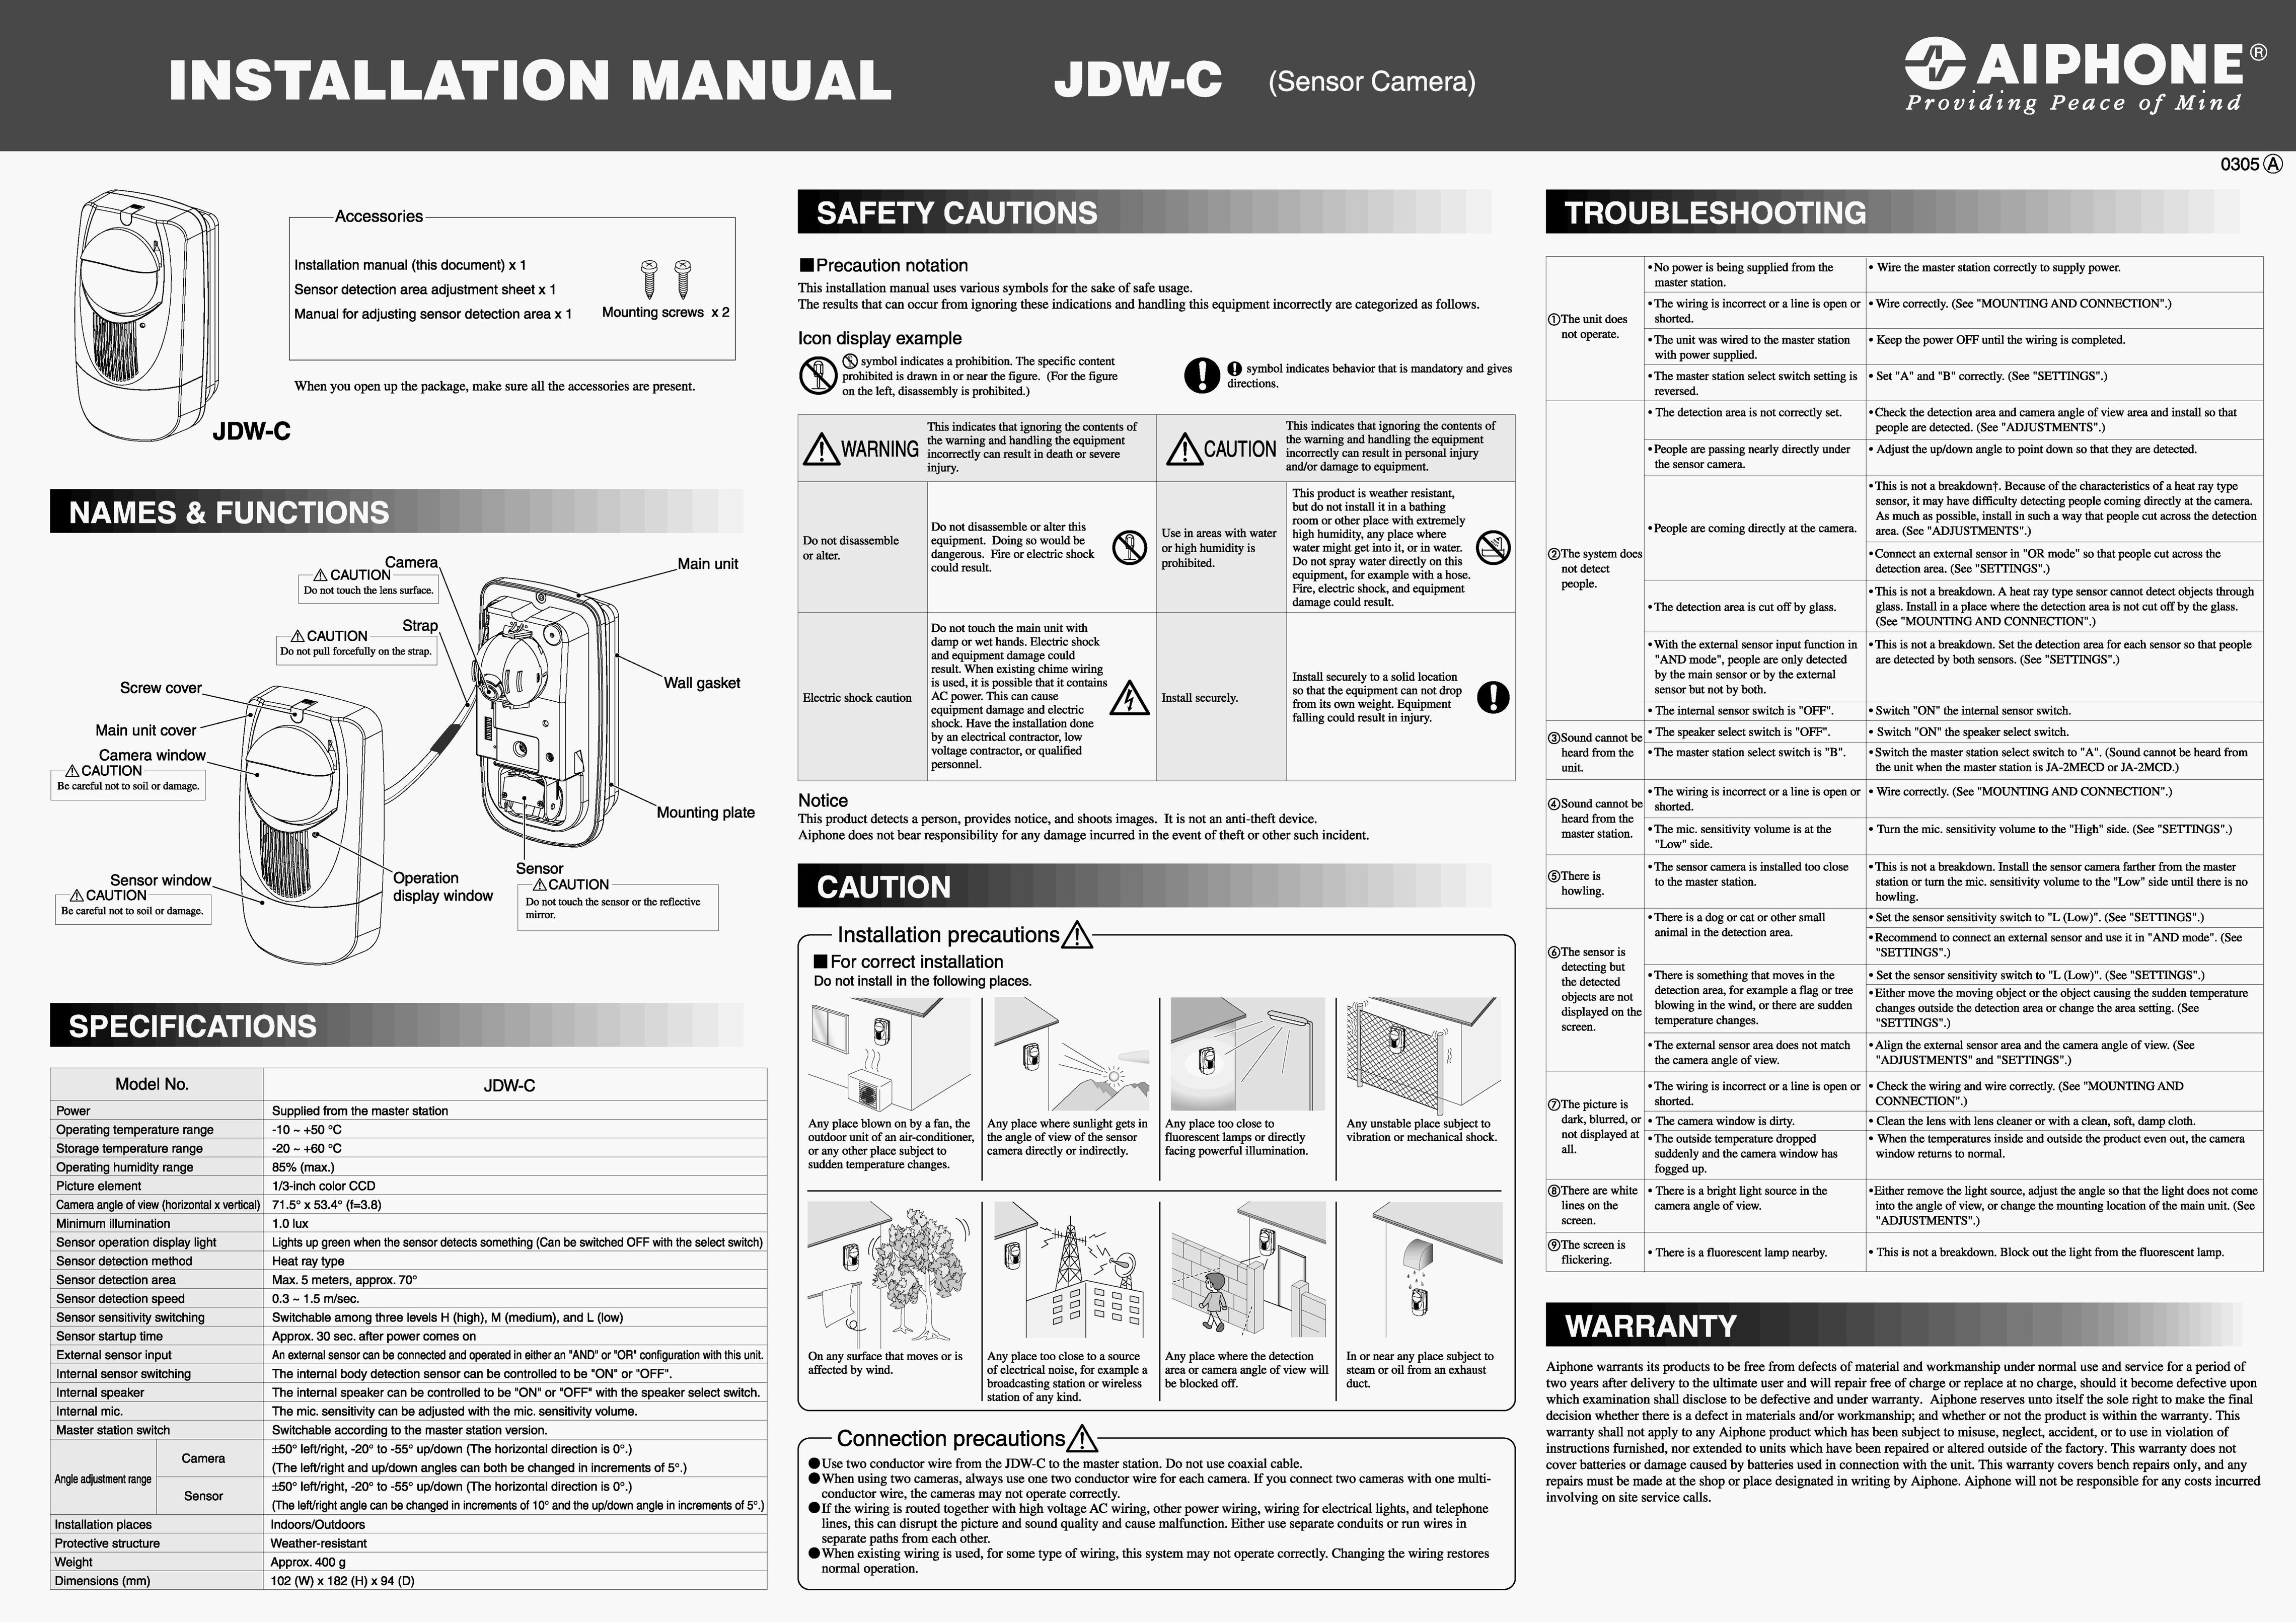 Aiphone JDW-C Home Security System User Manual